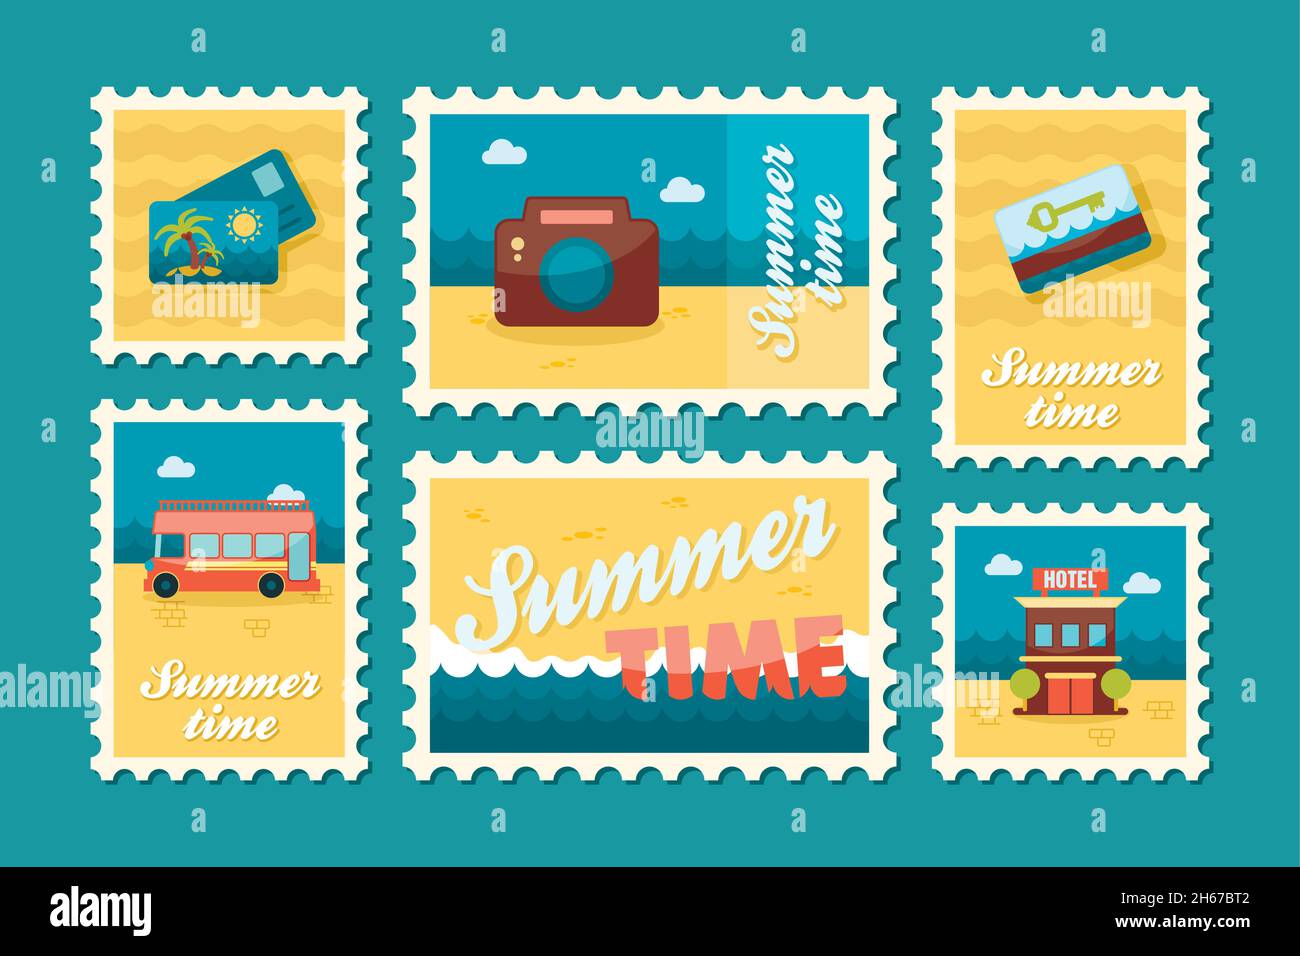 Postage stamp camera Stock Vector Images - Alamy